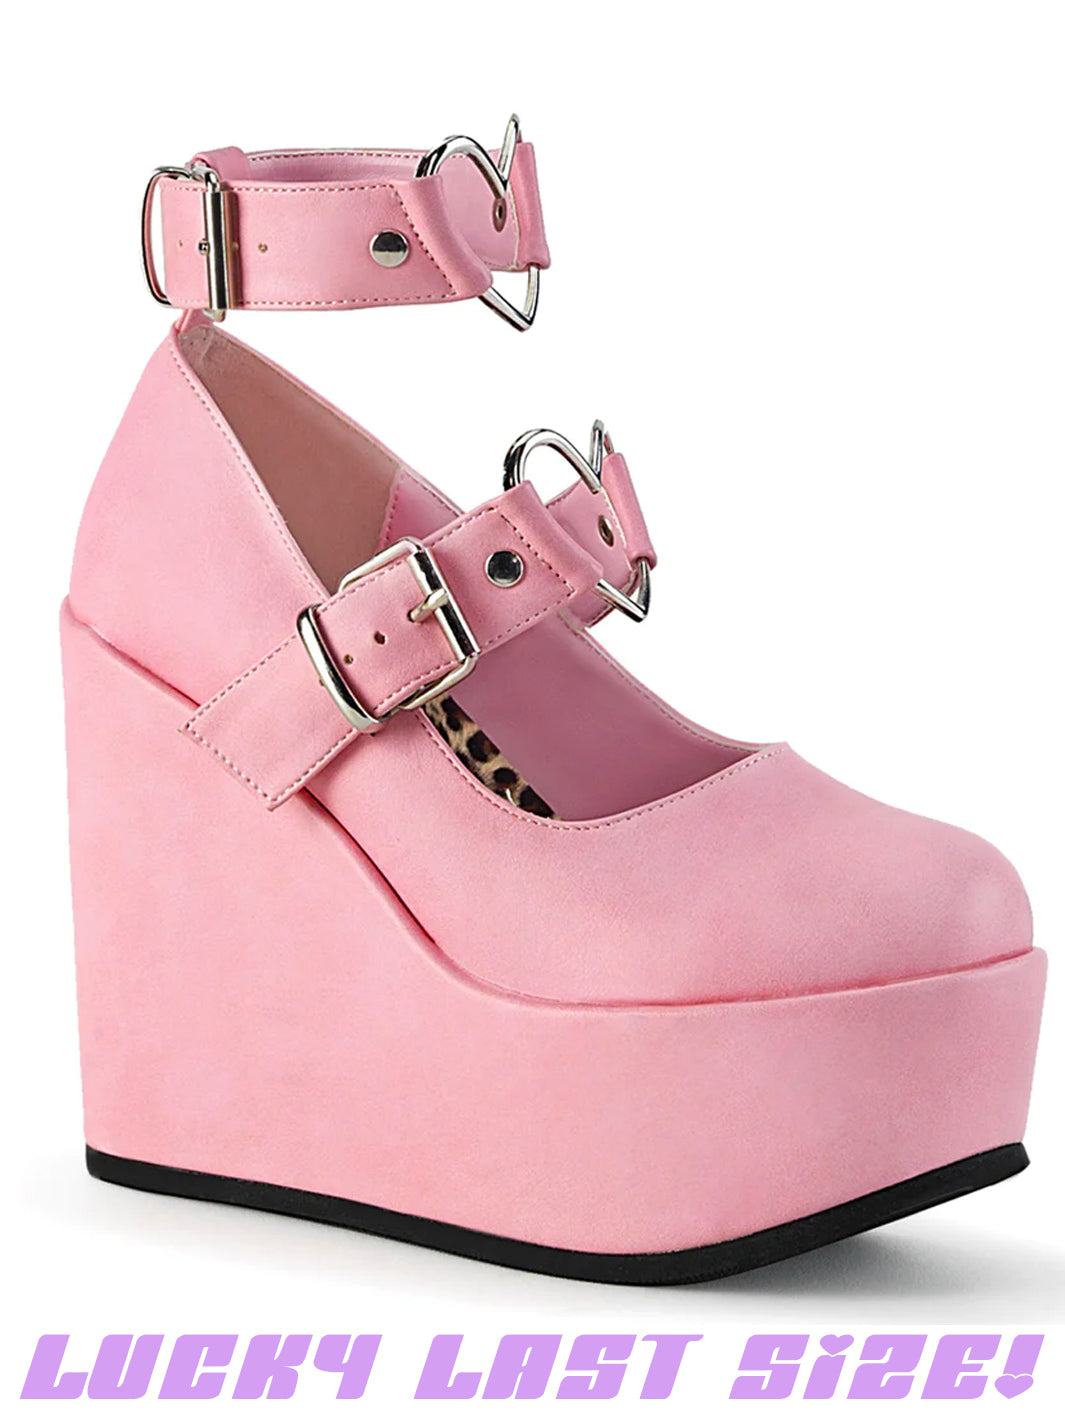 POISON-99-2 - BABY PINK VEGAN LEATHER - SIZE 10